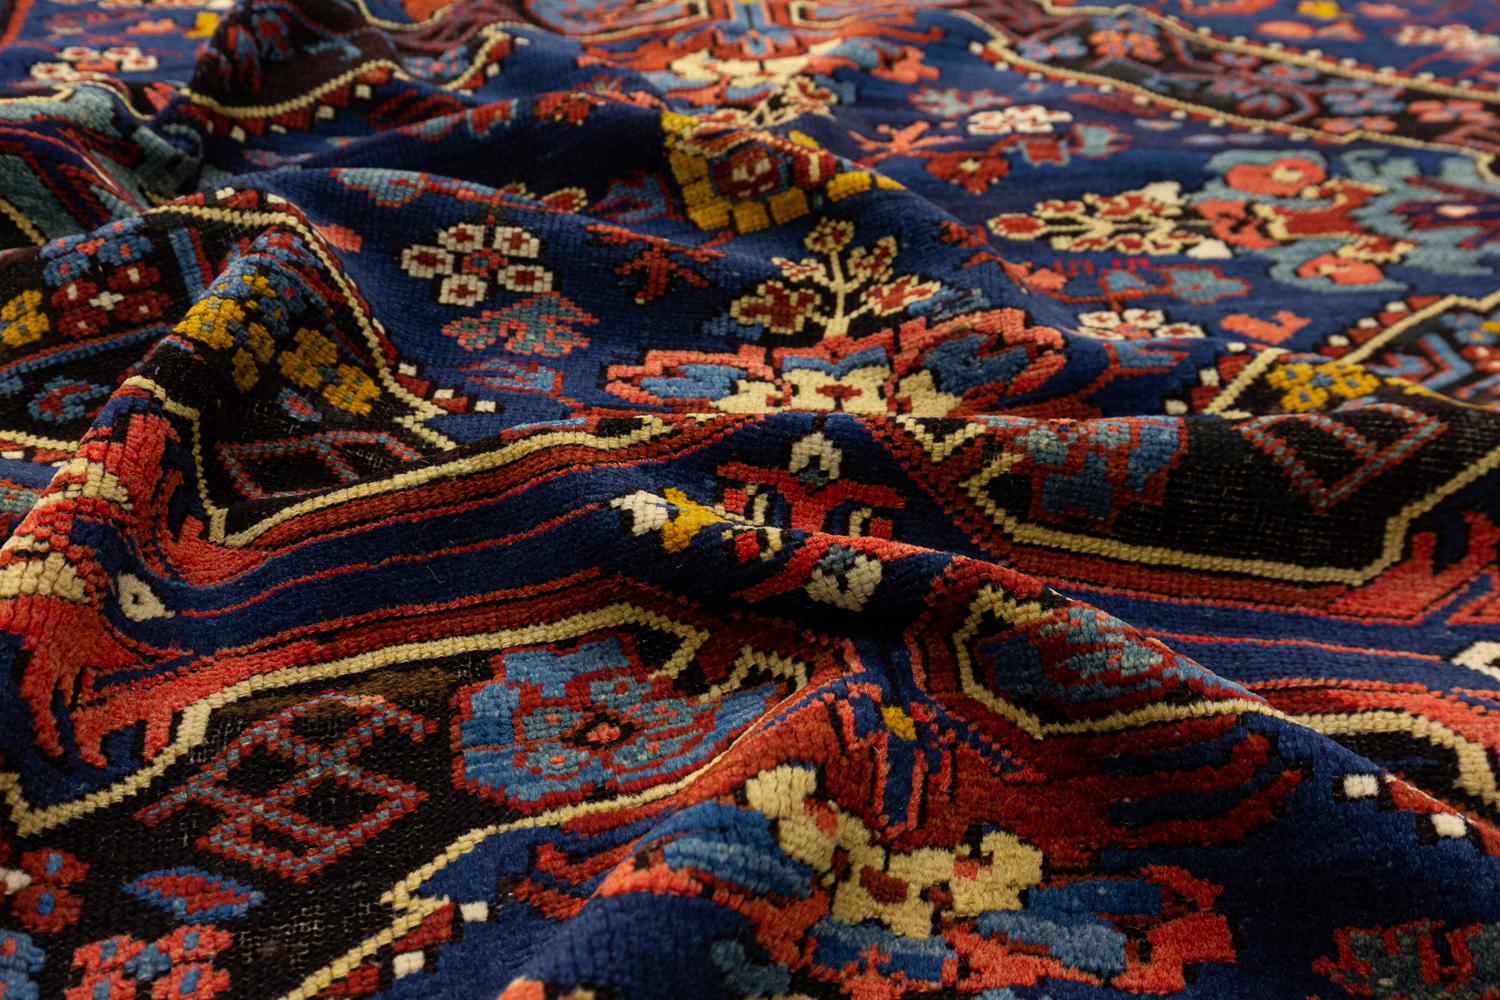 This antique Caucasian Seychour rug was woven in the northeast part of the Caucasus mountains which is in current-day Azerbaijan. This rug has no border which is a highly unique feature that is seldomly seen in antique carpets. It dates back to the